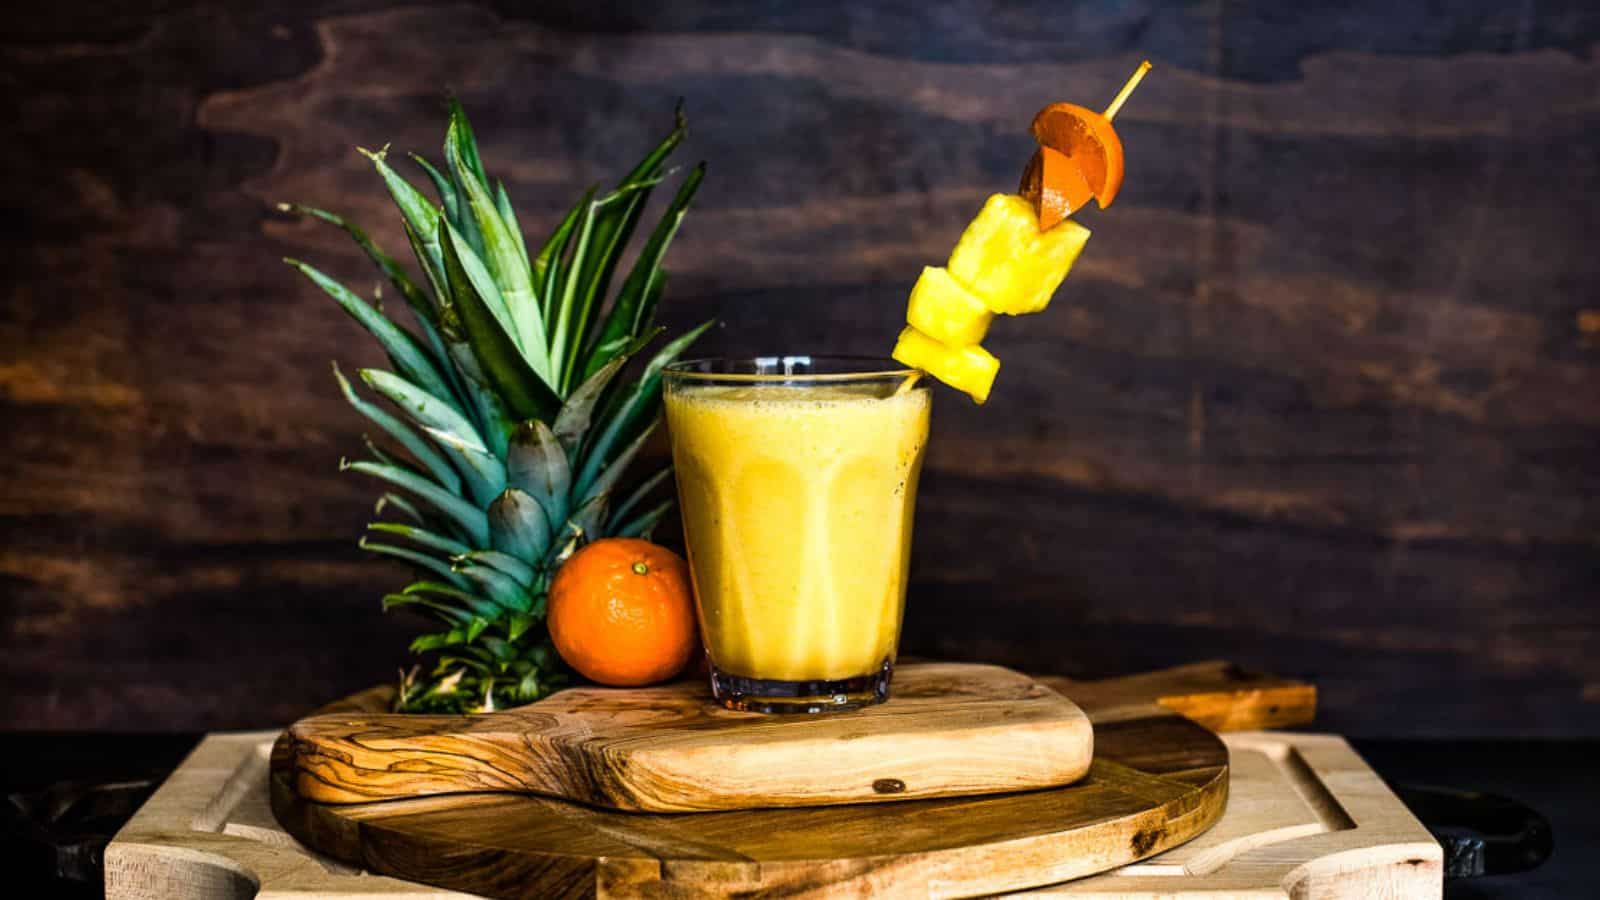 <p>This smoothie combines pineapple and banana for a tropical, creamy drink. Ready in just 5 minutes, it includes coconut milk for added richness. The result is a sweet and refreshing beverage, perfect for hot days. Enjoy a quick, tropical smoothie anytime.<br><strong>Get the Recipe: </strong><a href="https://reneenicoleskitchen.com/3-ingredient-pineapple-smoothie/?utm_source=msn&utm_medium=page&utm_campaign=16%20refreshing%20drink%20recipes%20to%20help%20you%20cool%20off%20this%20summer">Pineapple Banana Smoothie</a></p> <p>The post <a href="https://tastesdelicious.com/refreshing-drinks/">16 Refreshing Drink Recipes to Help You Cool Off This Summer</a> appeared first on <a href="https://tastesdelicious.com">Tastes Delicious</a>.</p>